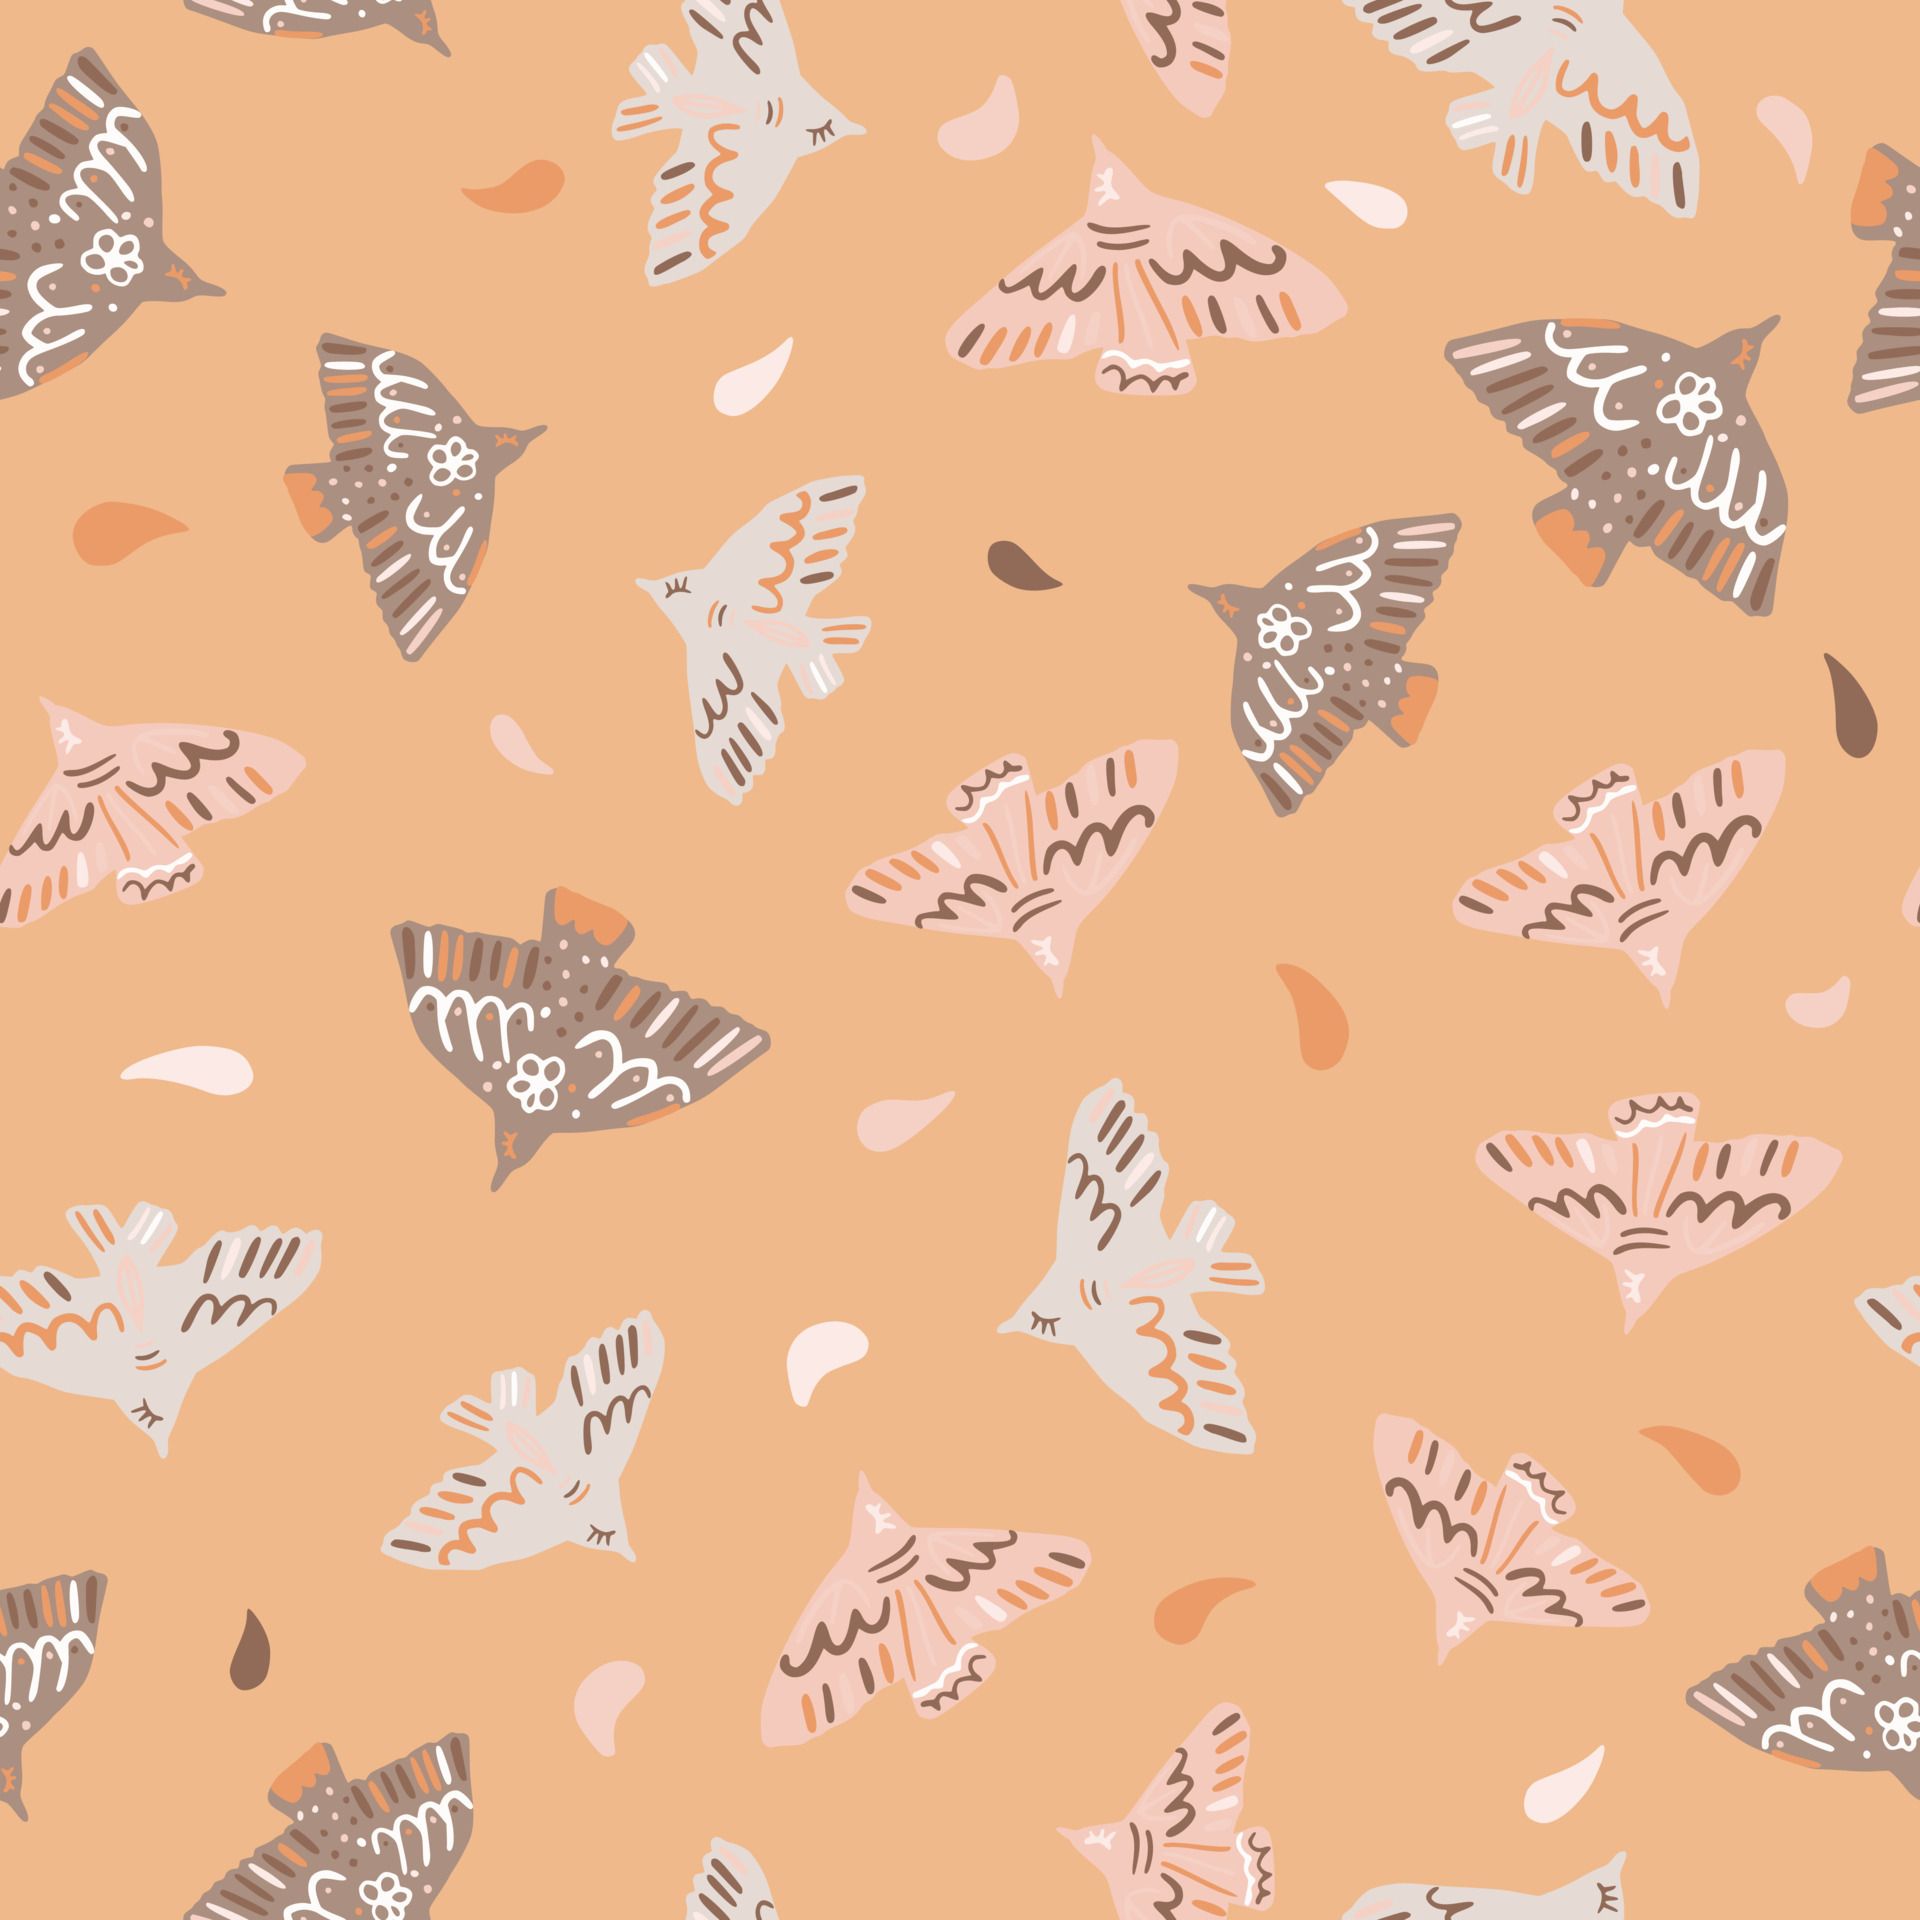 Pastel tender seamless pattern with bird ornament. Soft orange background with white and beige bird silhouettes